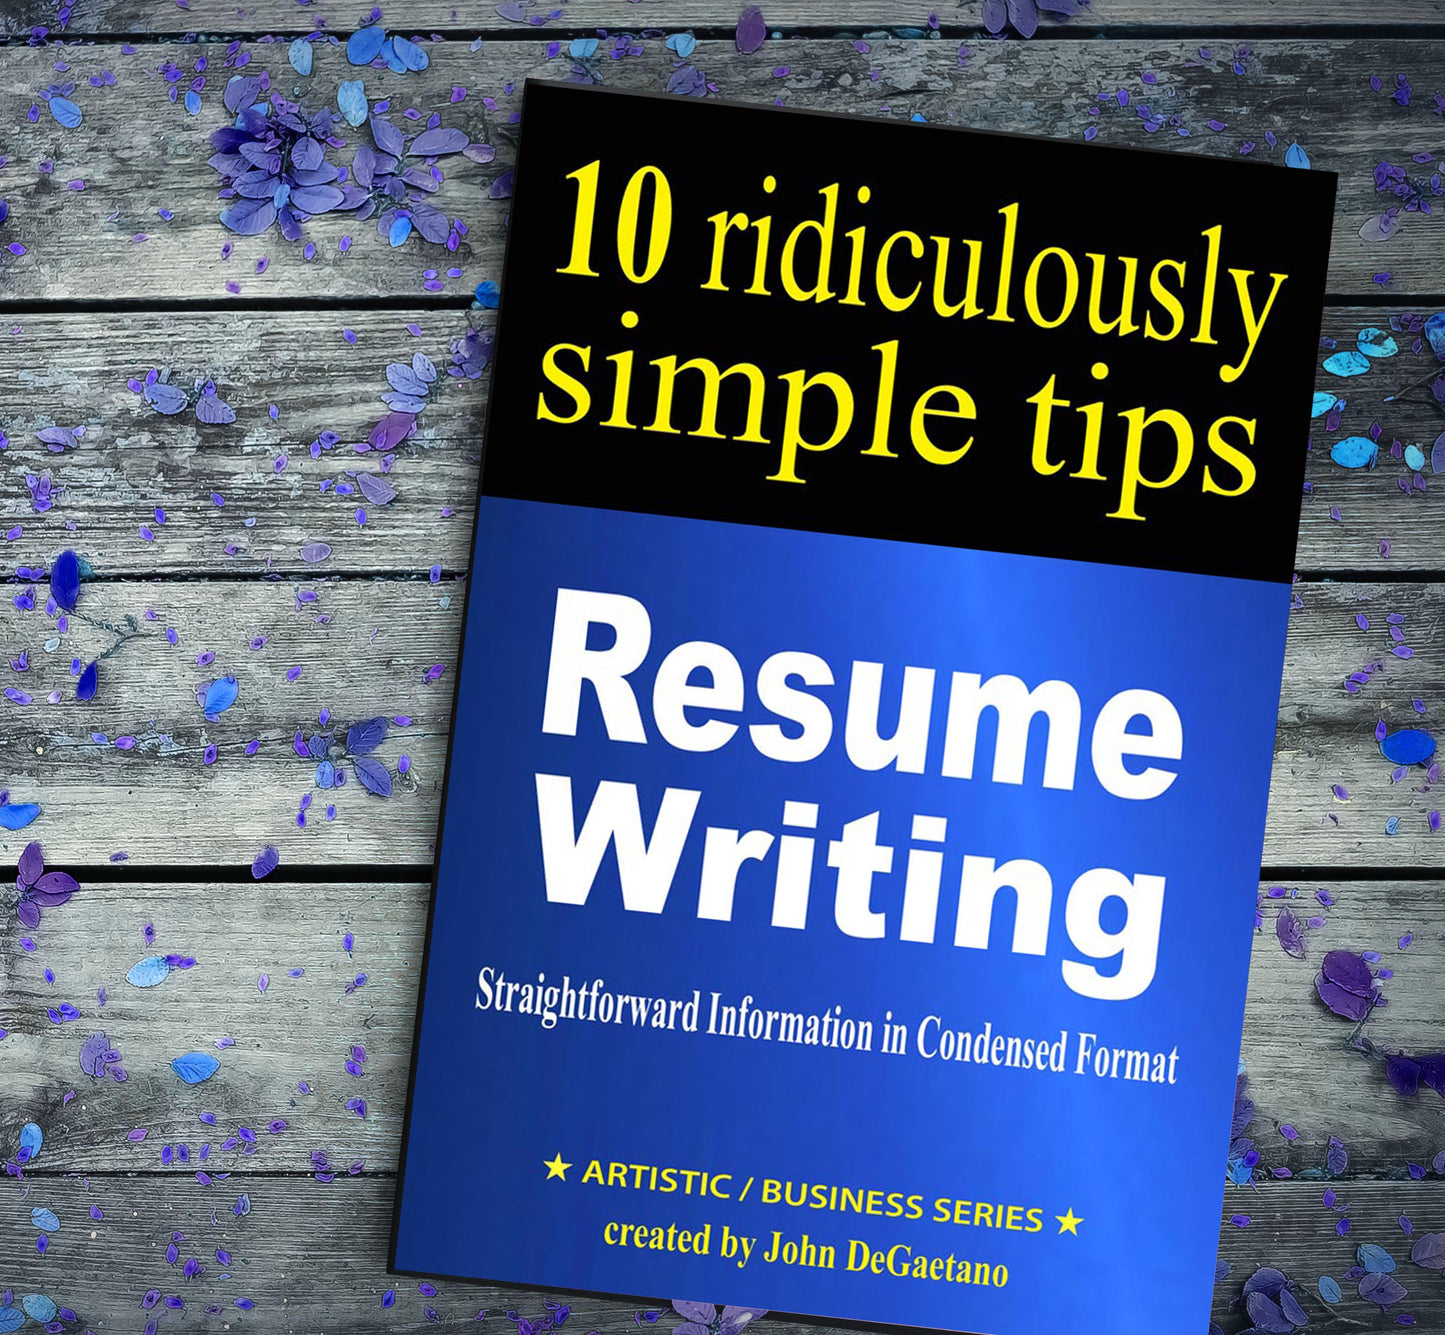 Resume Writing: 10 Ridiculously Simple Tips